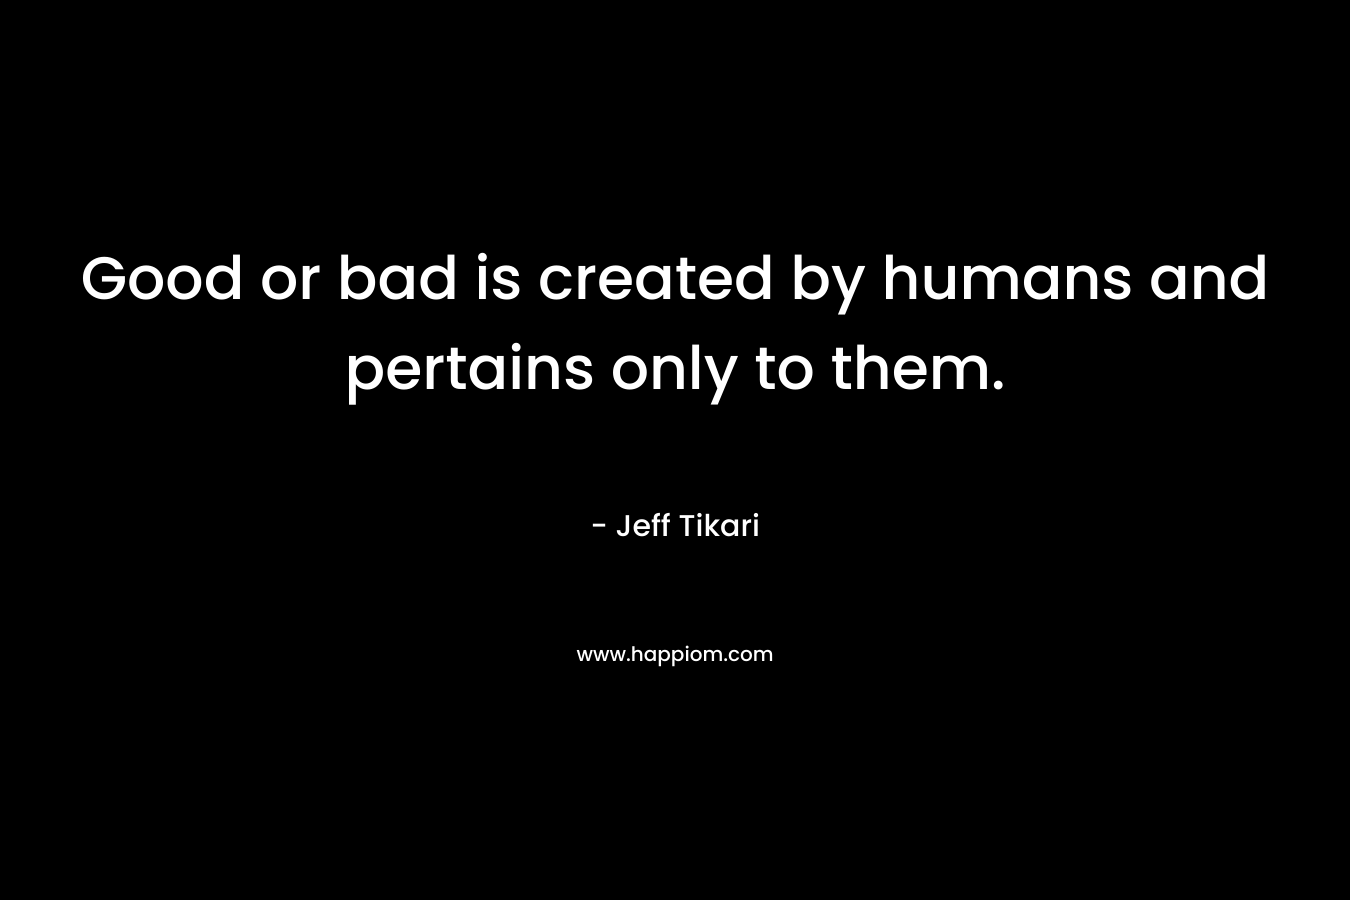 Good or bad is created by humans and pertains only to them.